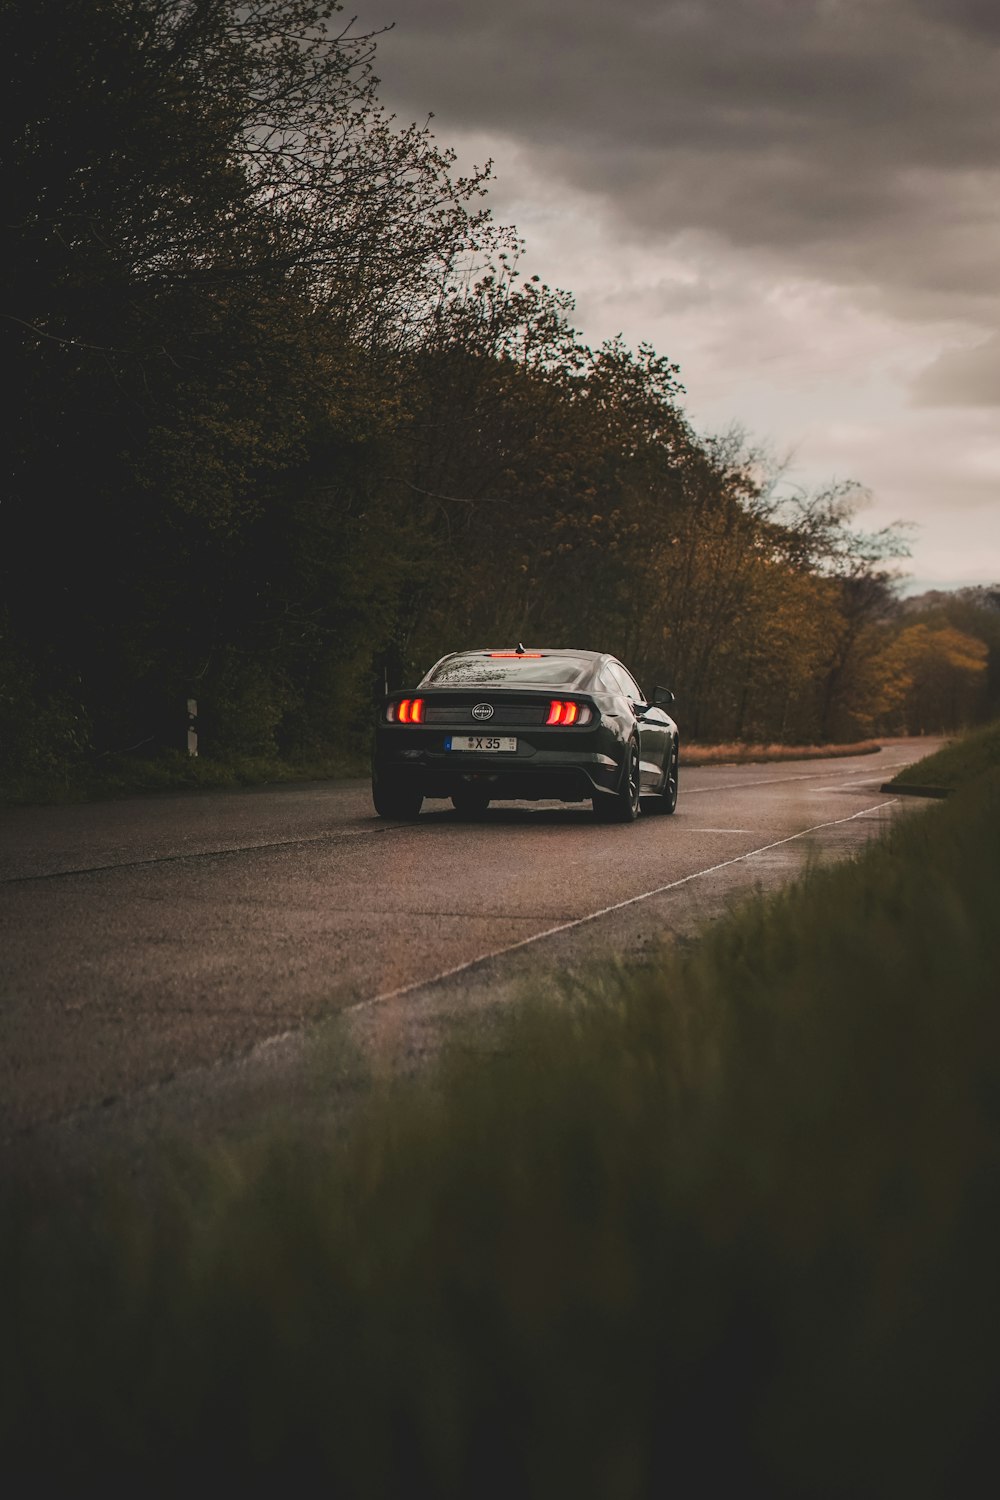 a black sports car driving down a country road